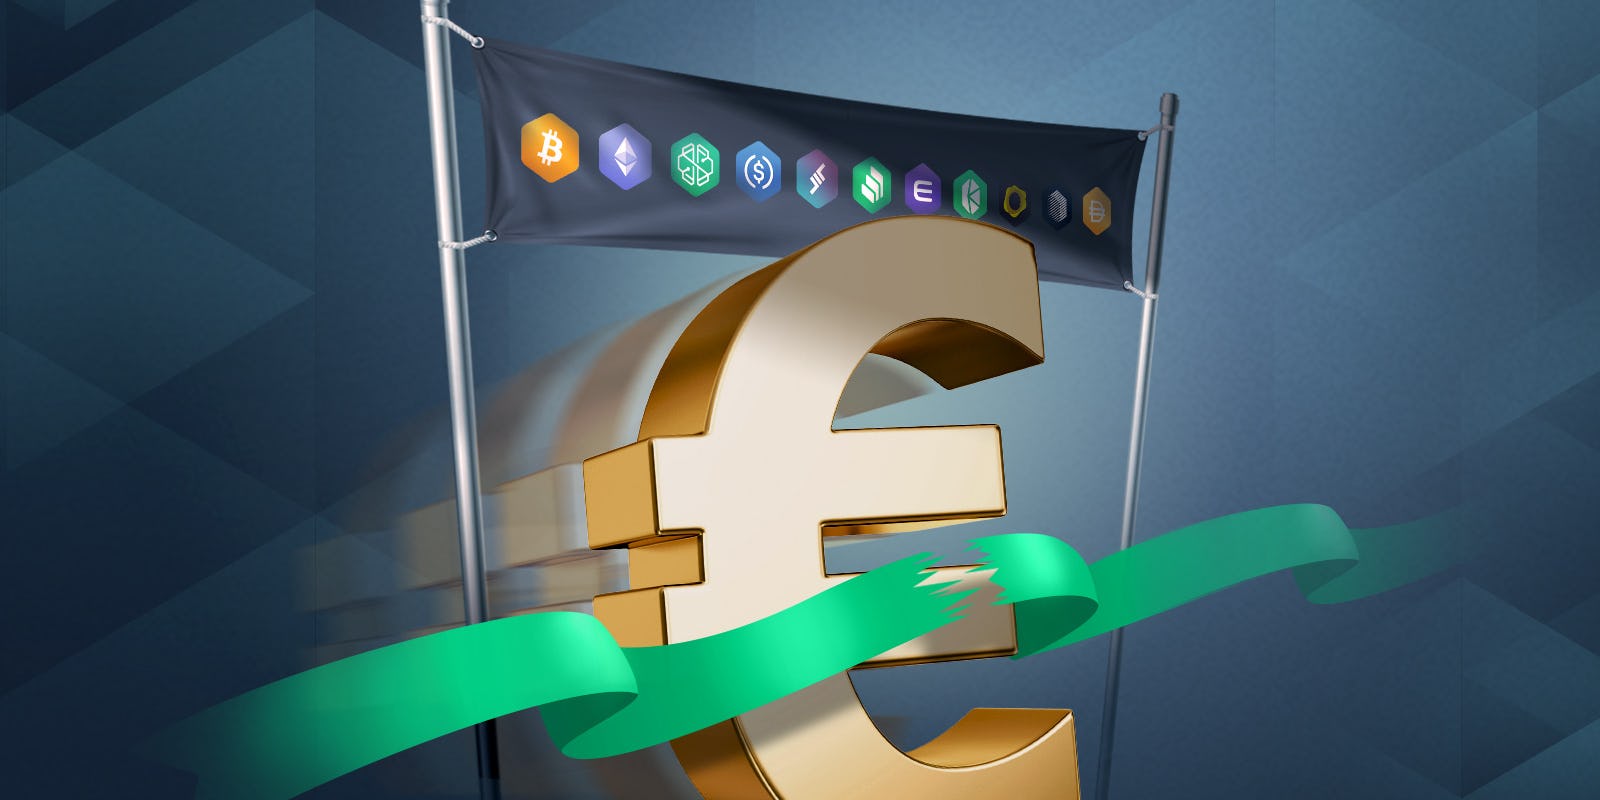 Faster EUR payment processing